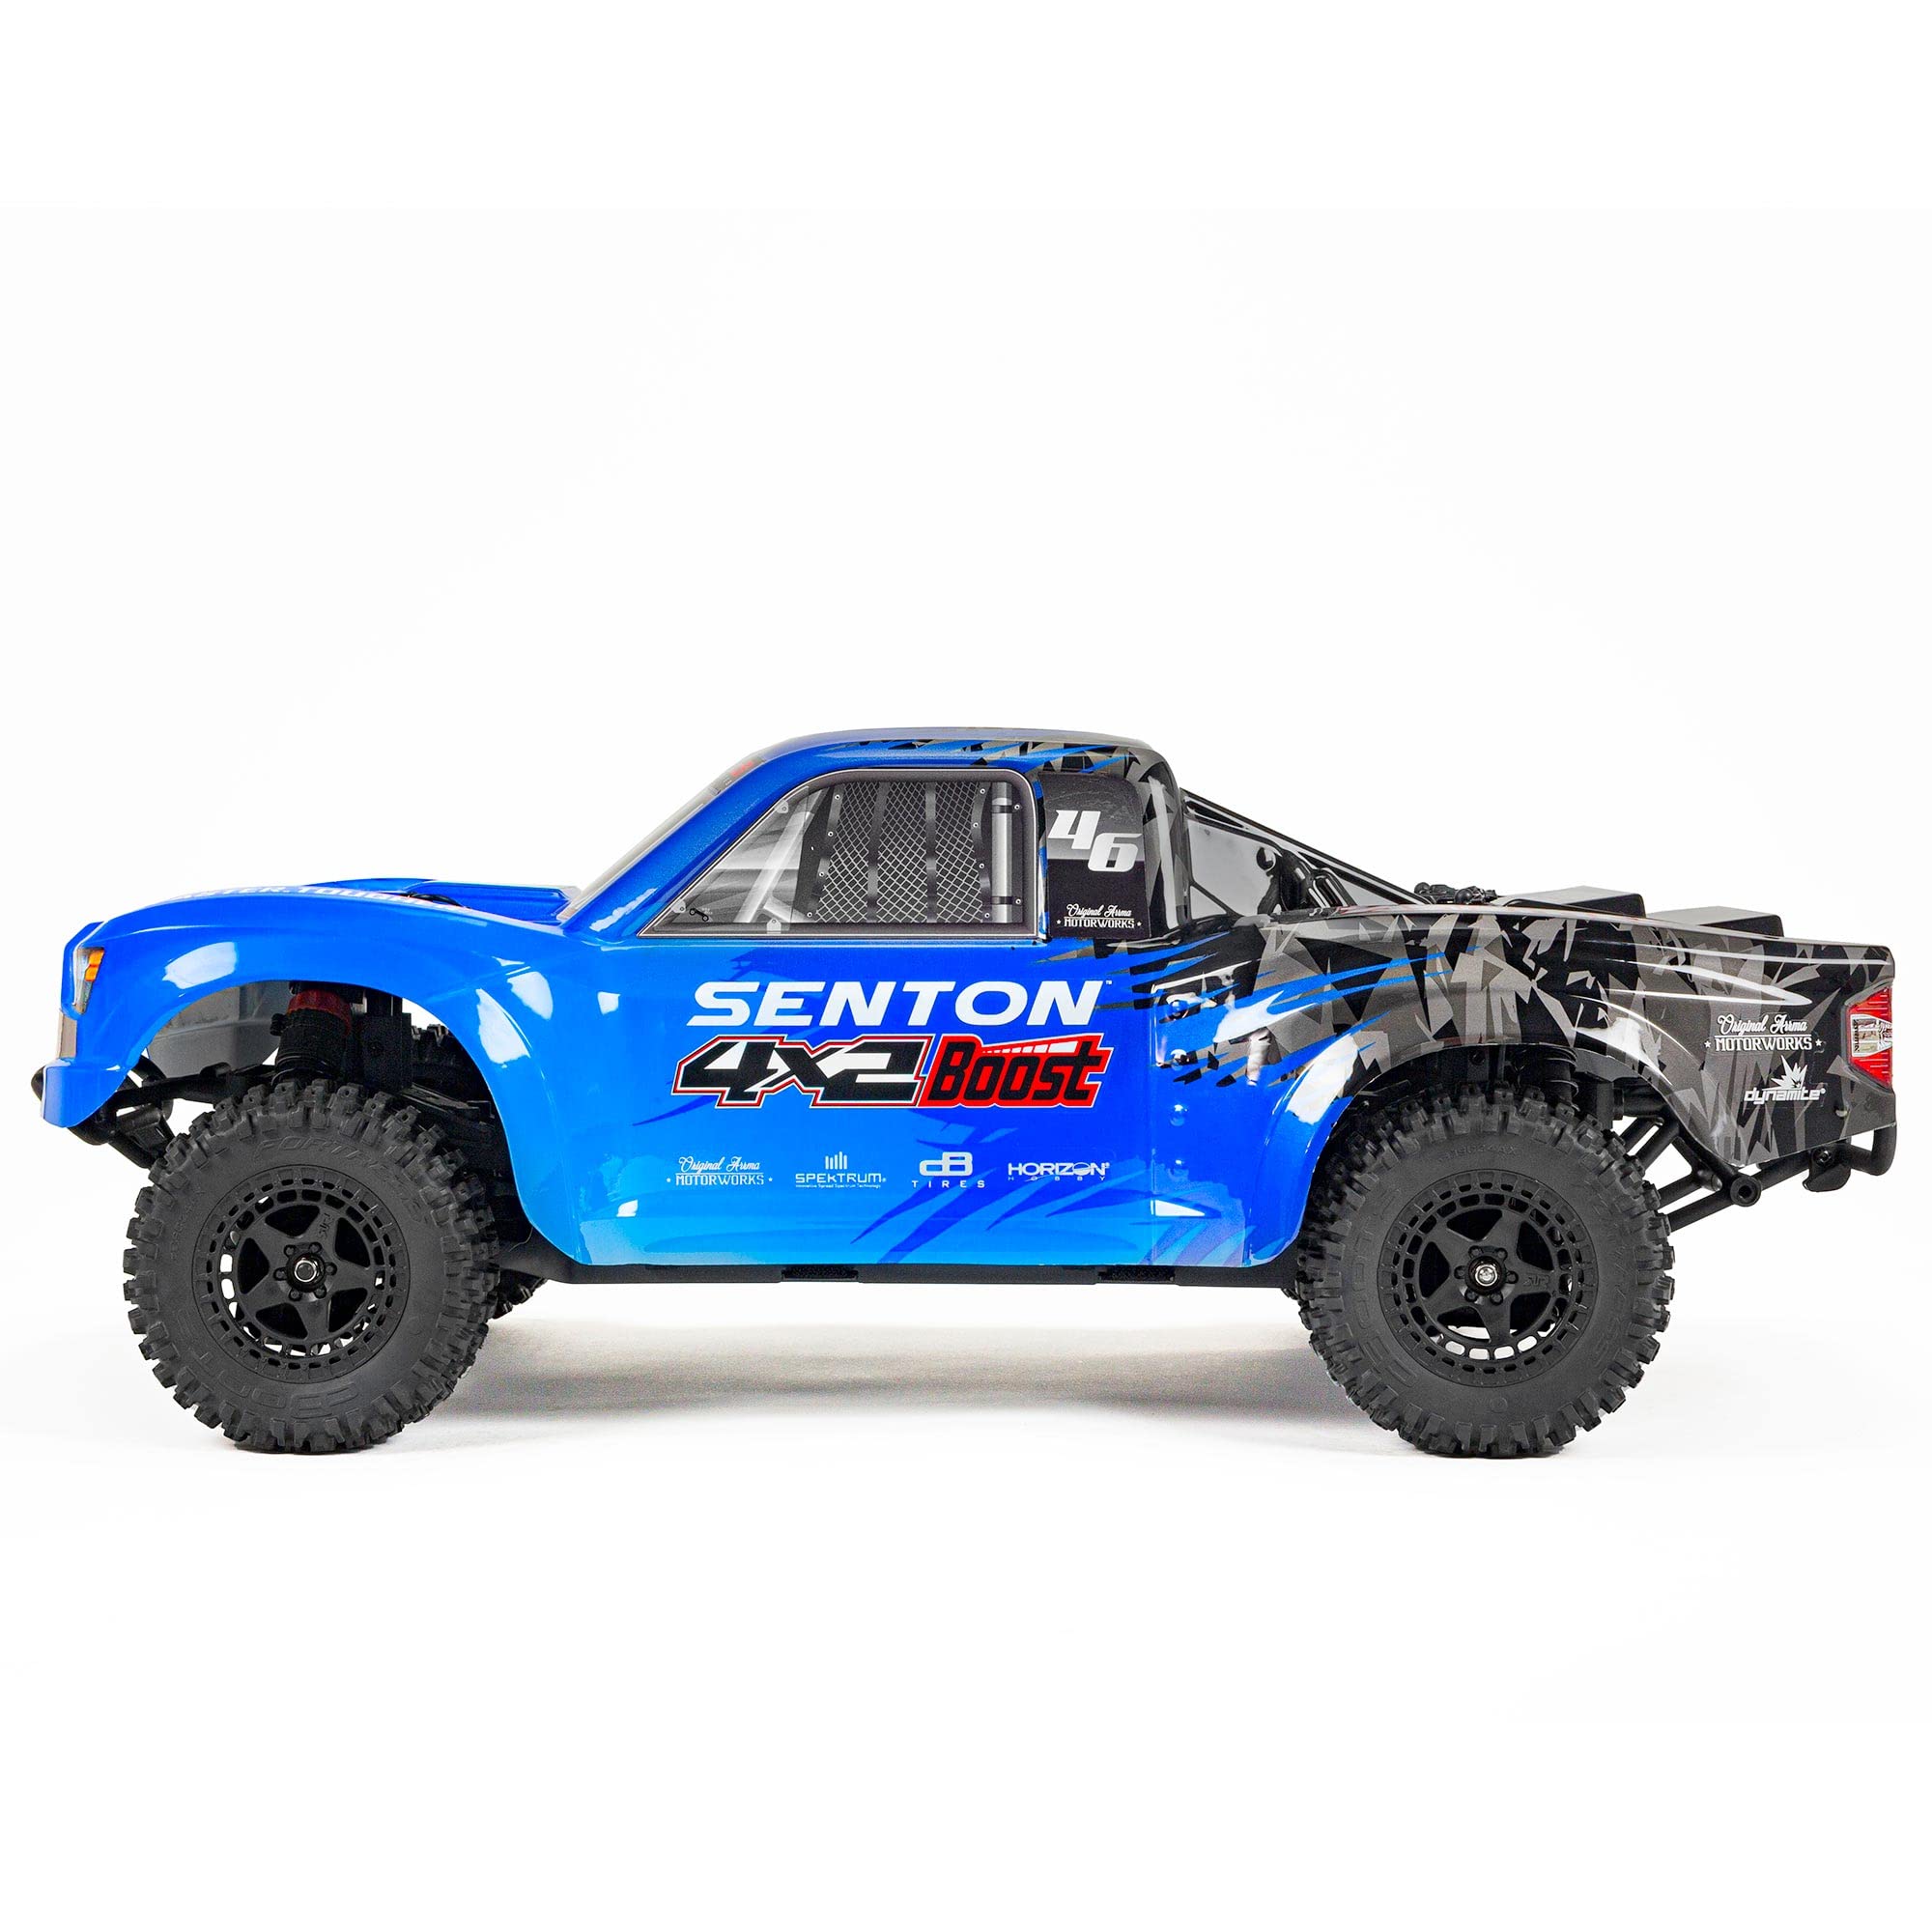 ARRMA RC Truck 1/10 SENTON 4X2 Boost MEGA 550 Brushed Short Course Truck RTR (Batteries and Charger Not Included), Blue, ARA4103V4T2